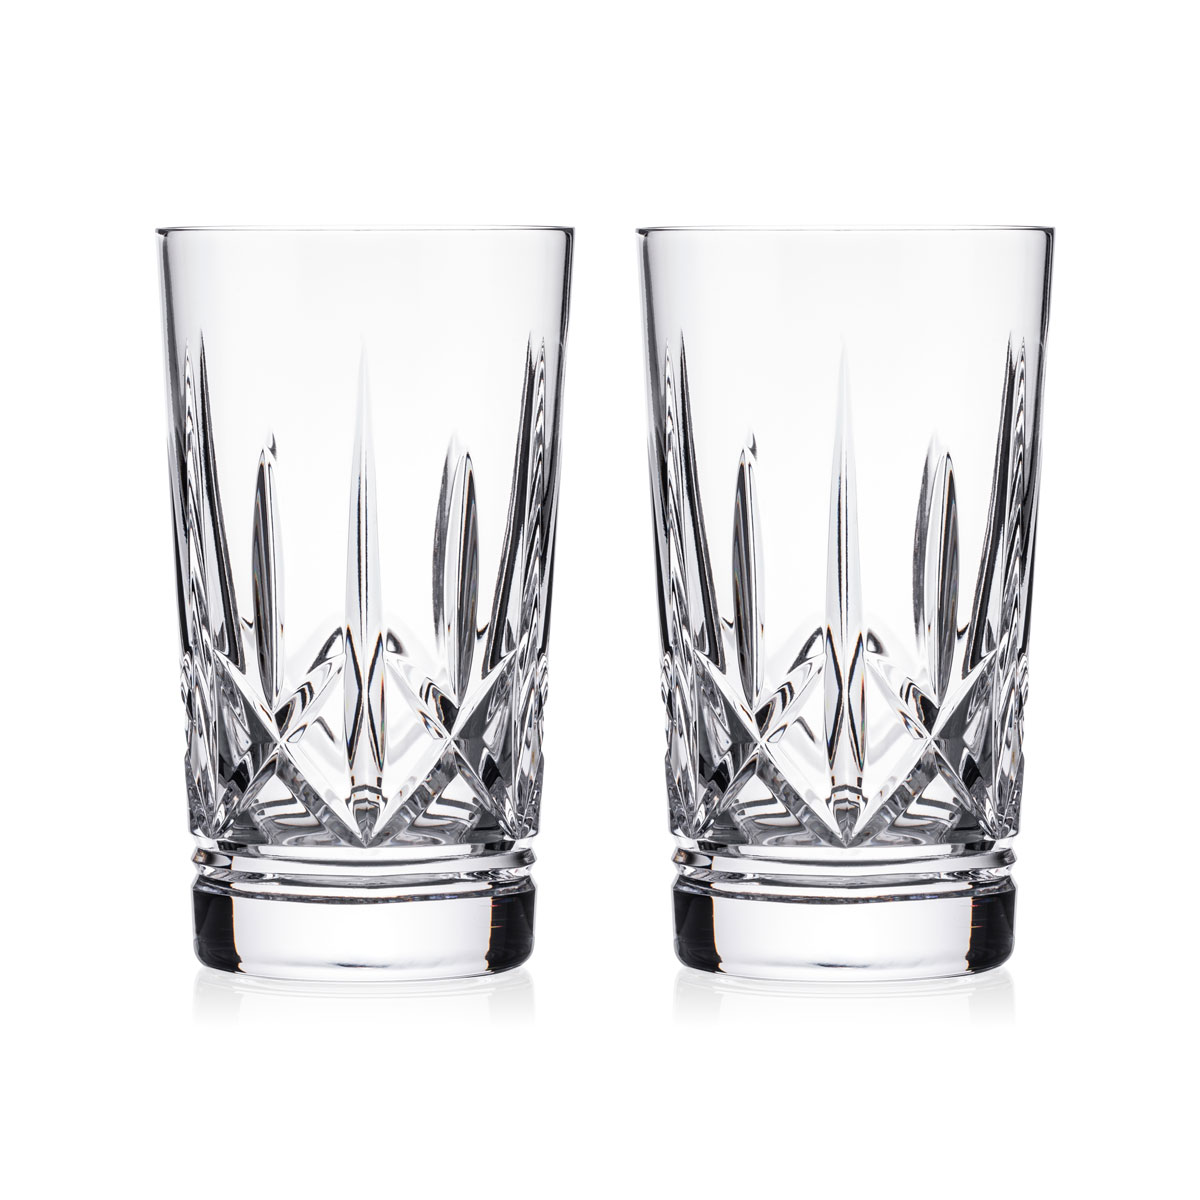 Waterford Crystal Eimer Hiball Glasses, Pair